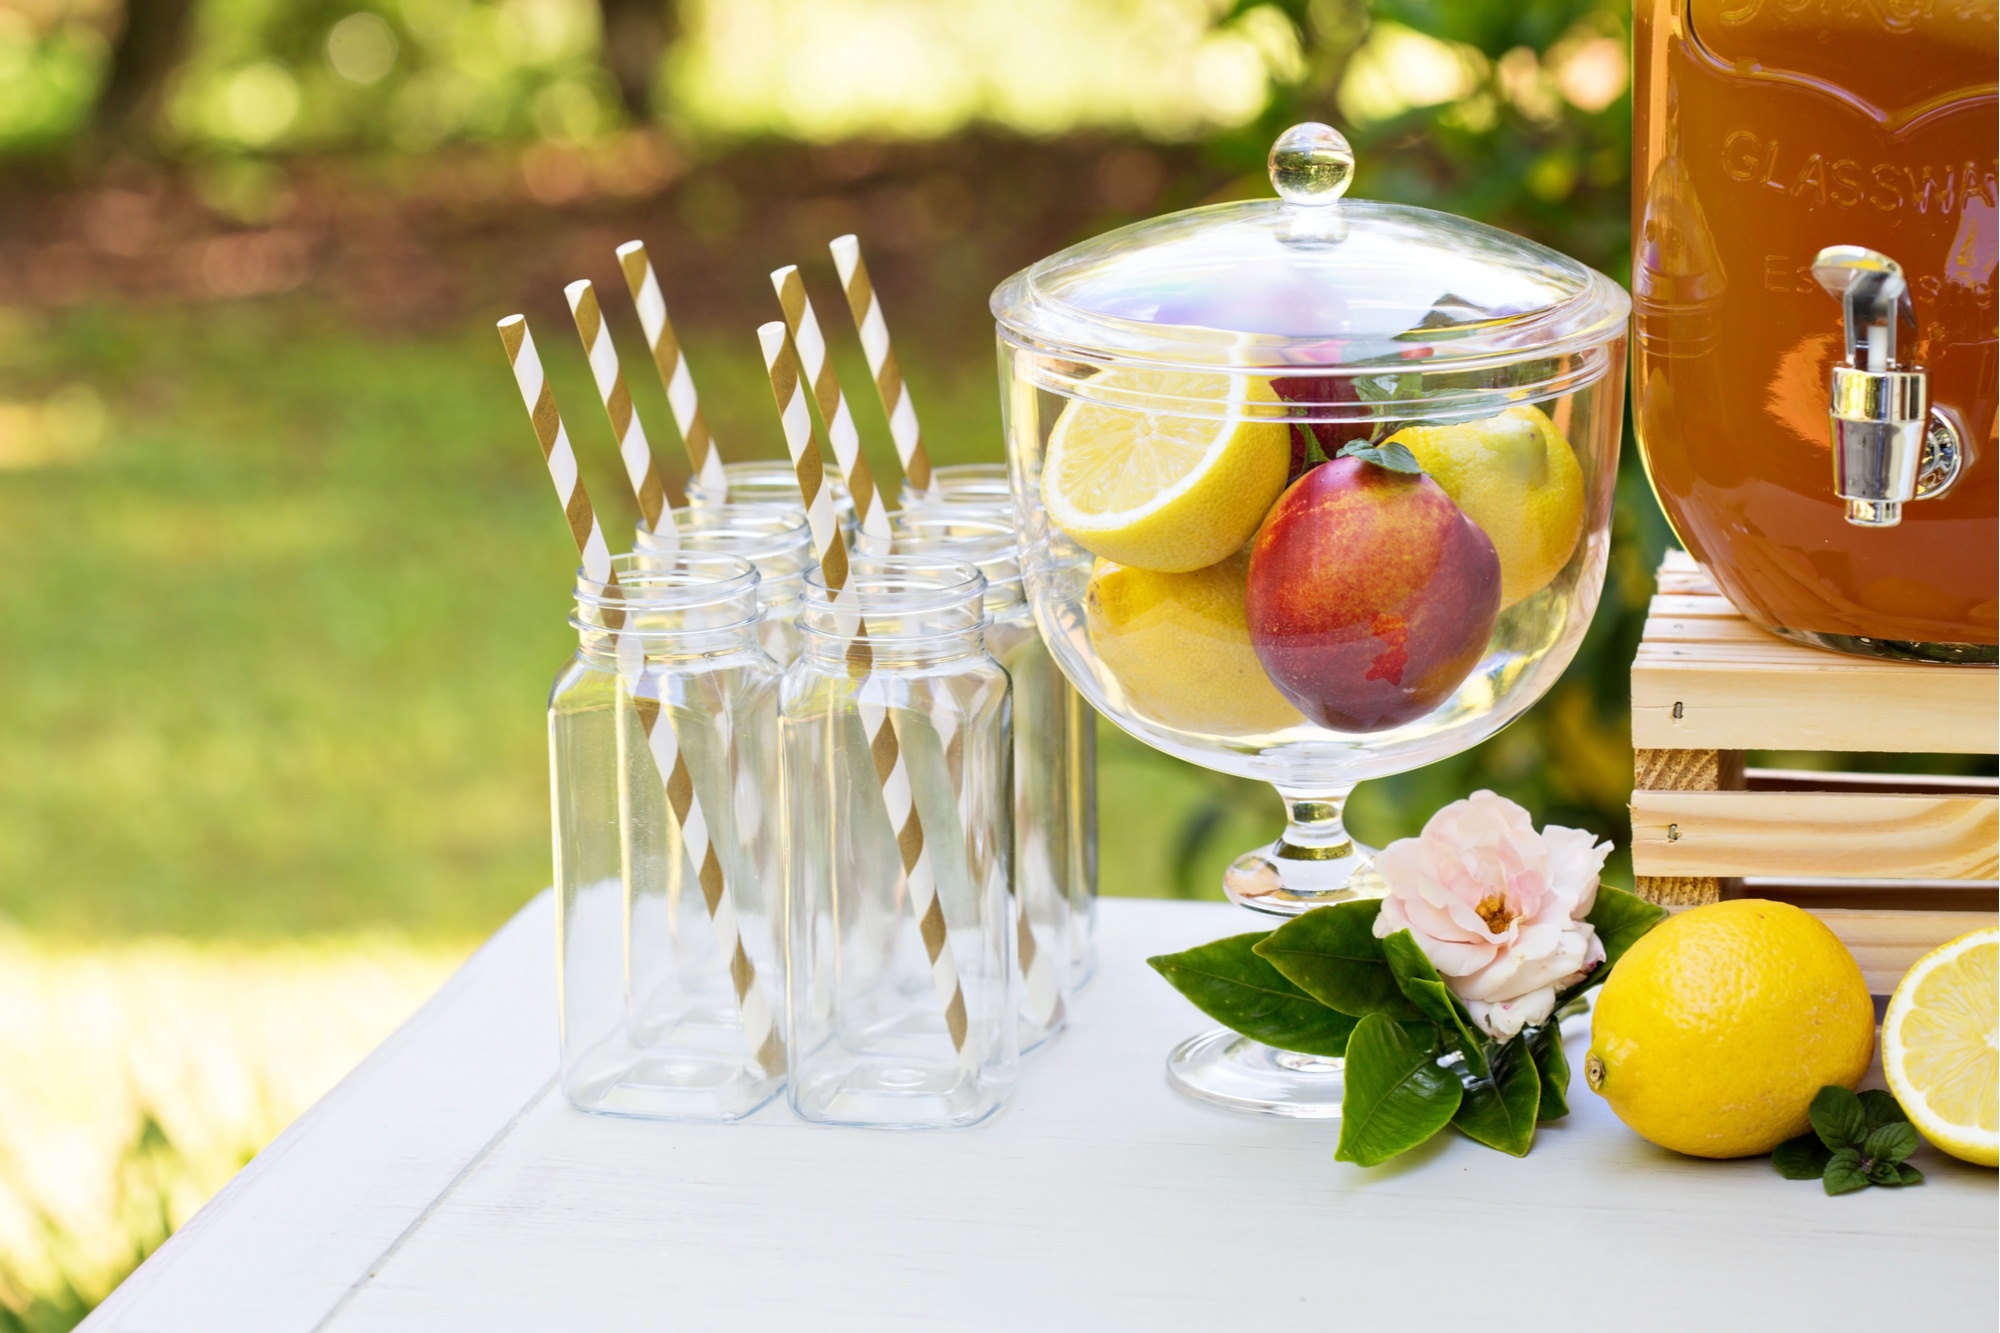 A table set up on the grass. It has glasses with striped straws on it, a bowl of fruit and a drinks dispenser fill with some sort of punch